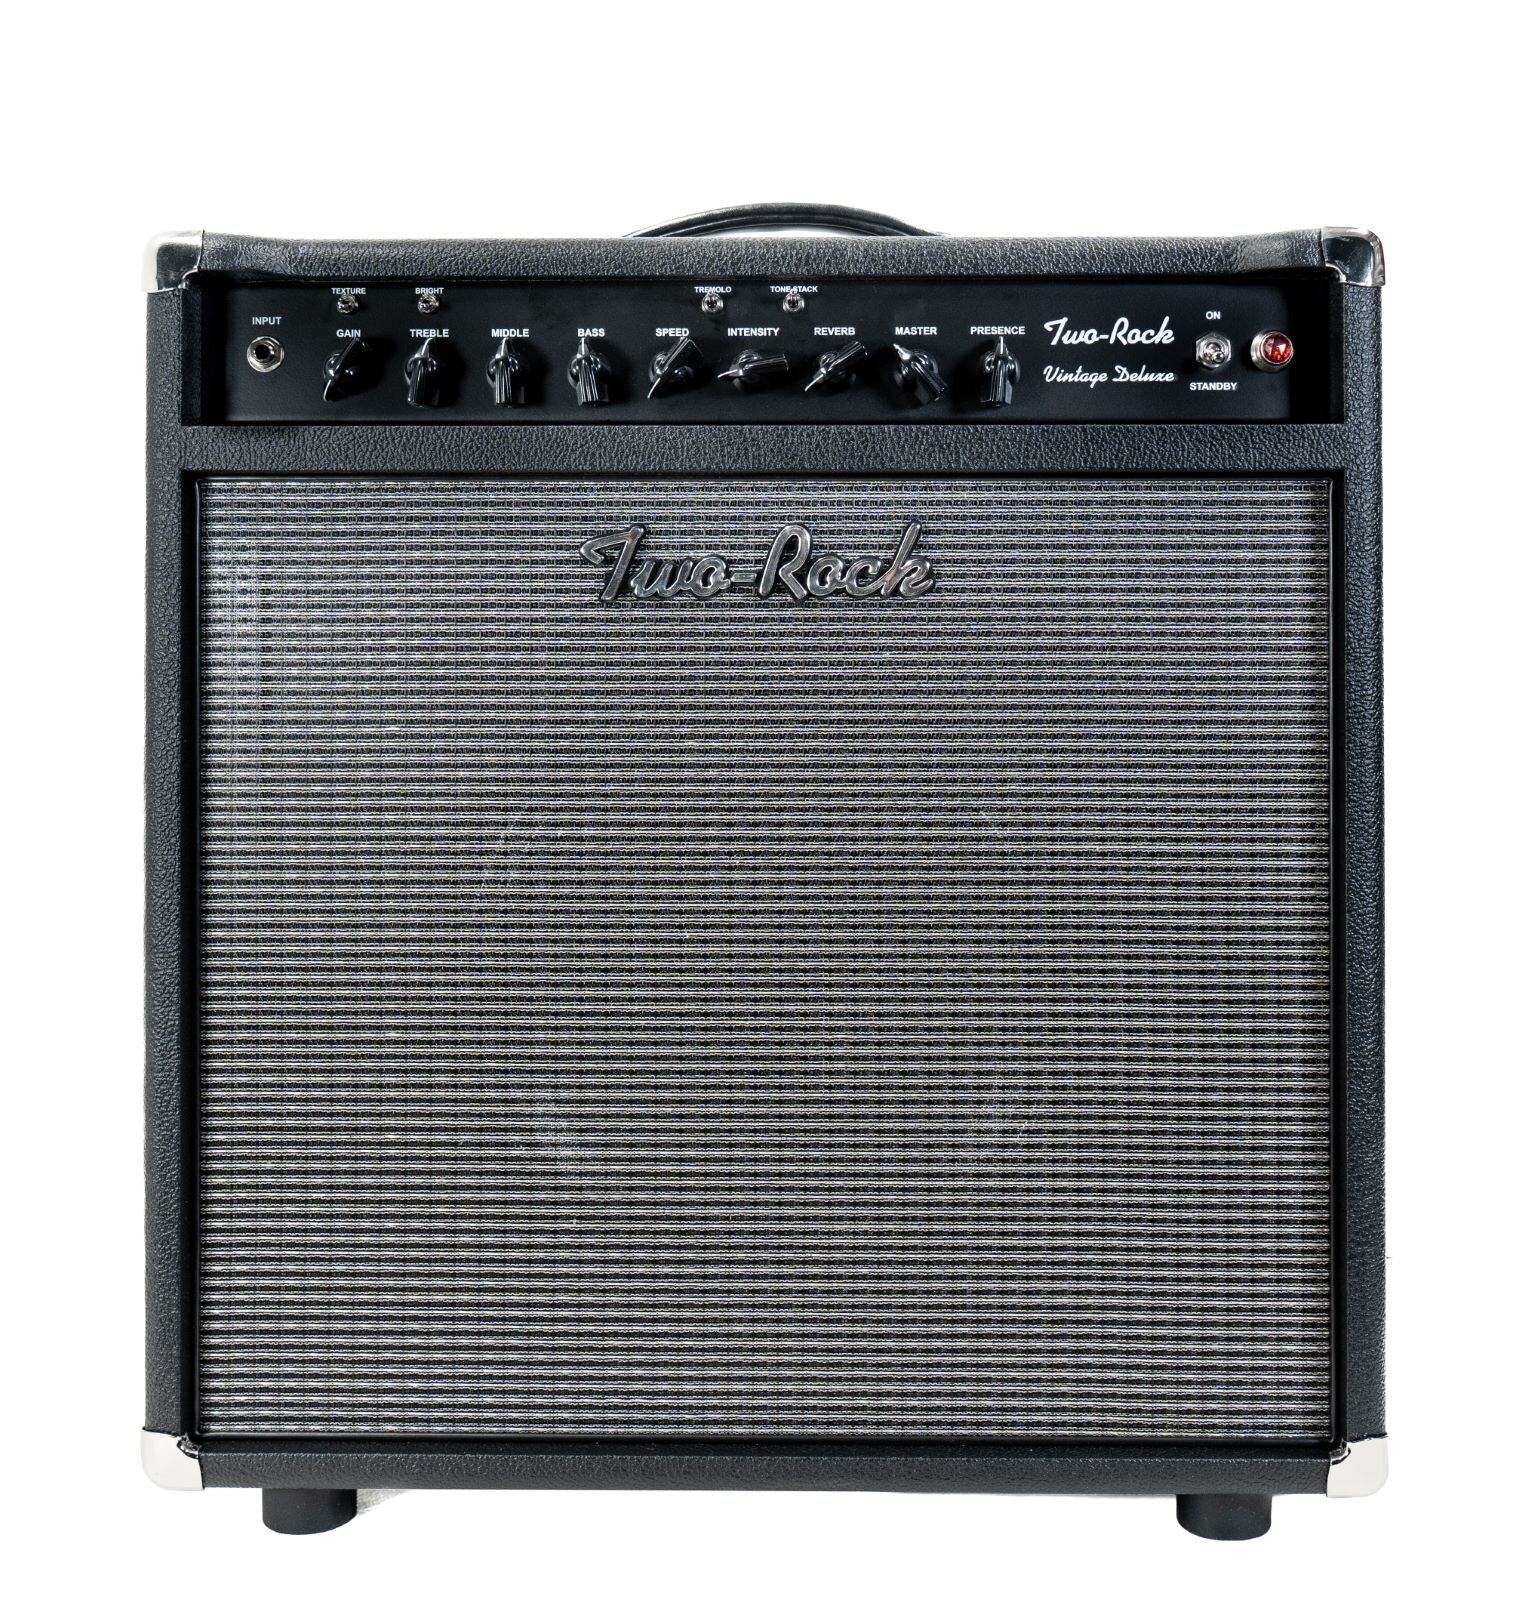 Two-Rock Vintage Deluxe, 40 Watt combo, Black chassis, black bronco, vintage silver cloth : photo 1